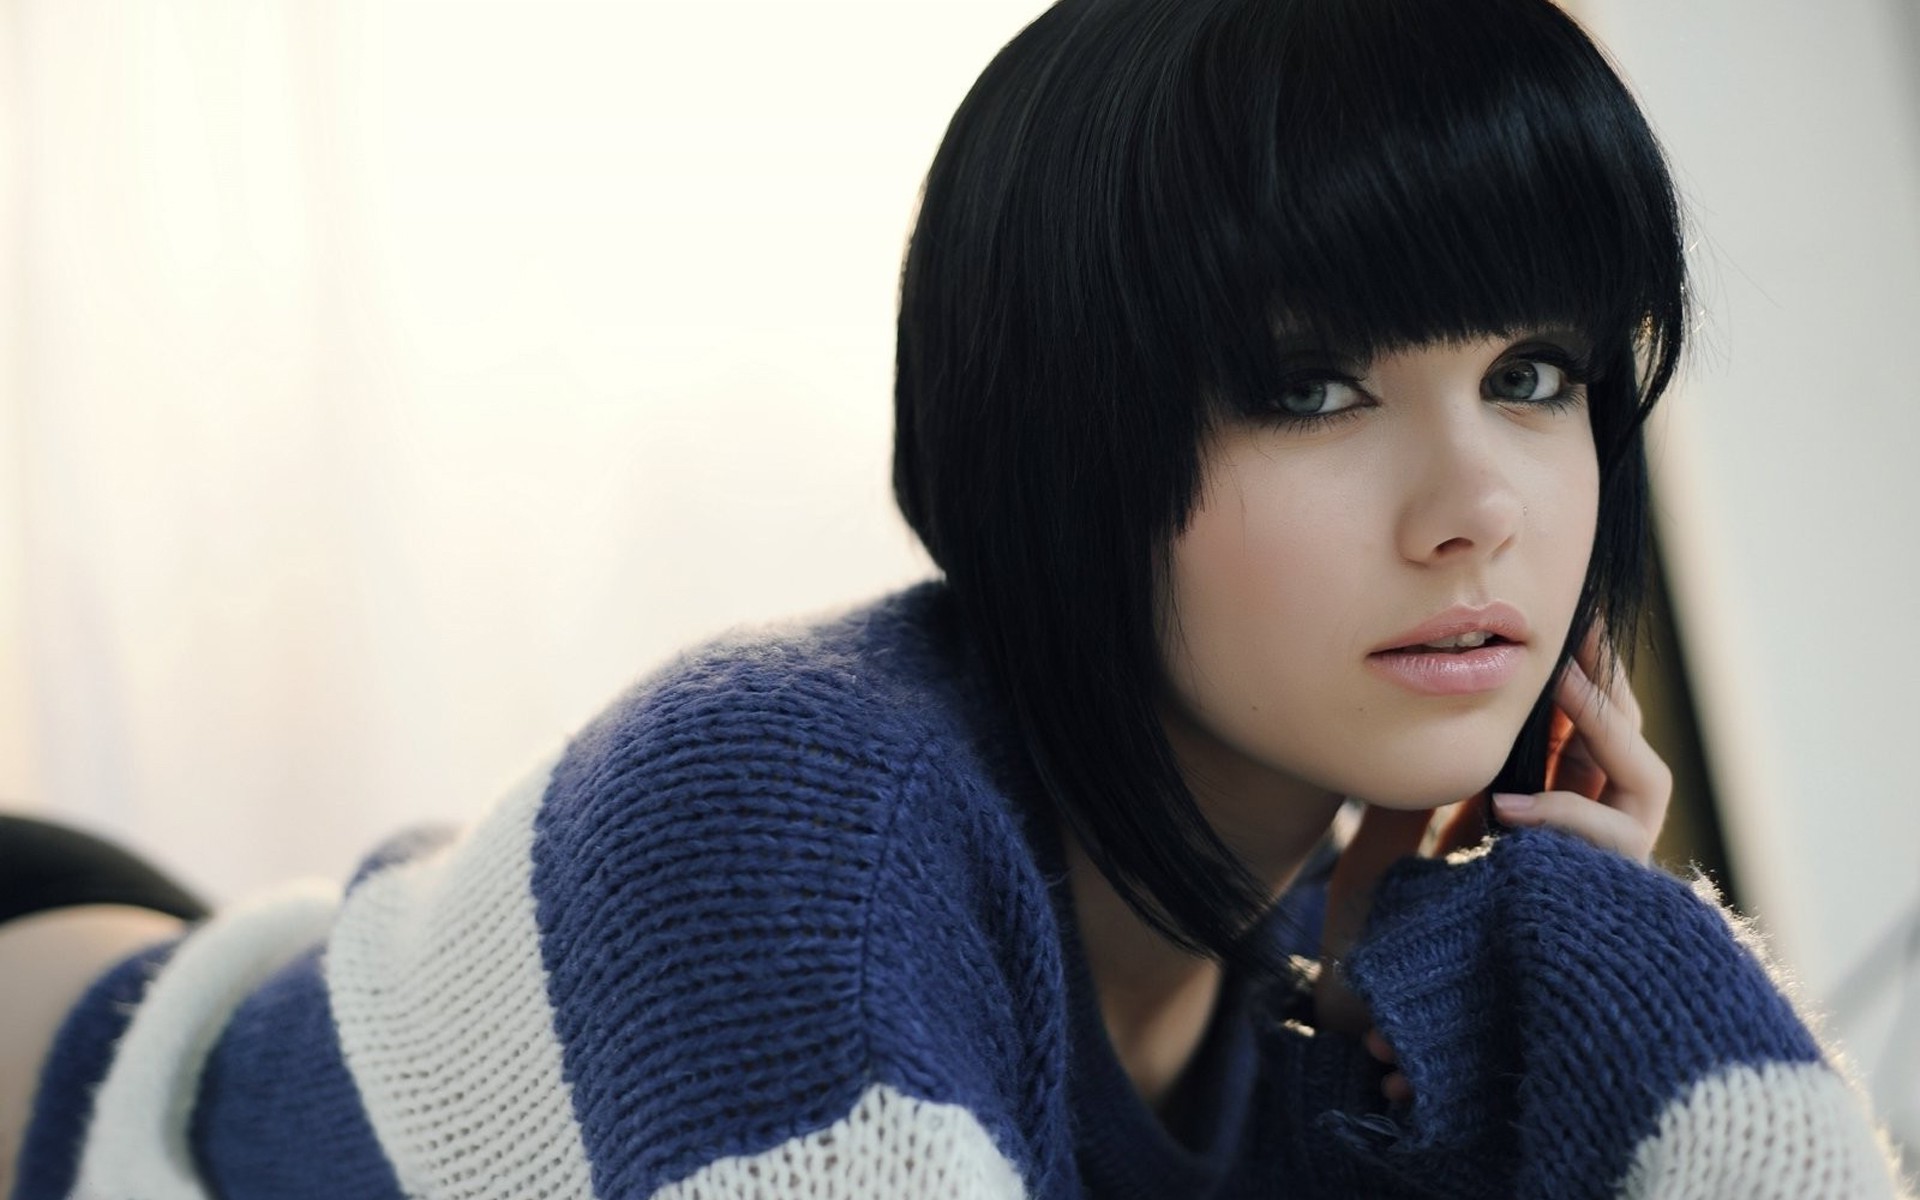 10. "Seductive woman with dark hair and captivating blue eyes" - wide 11